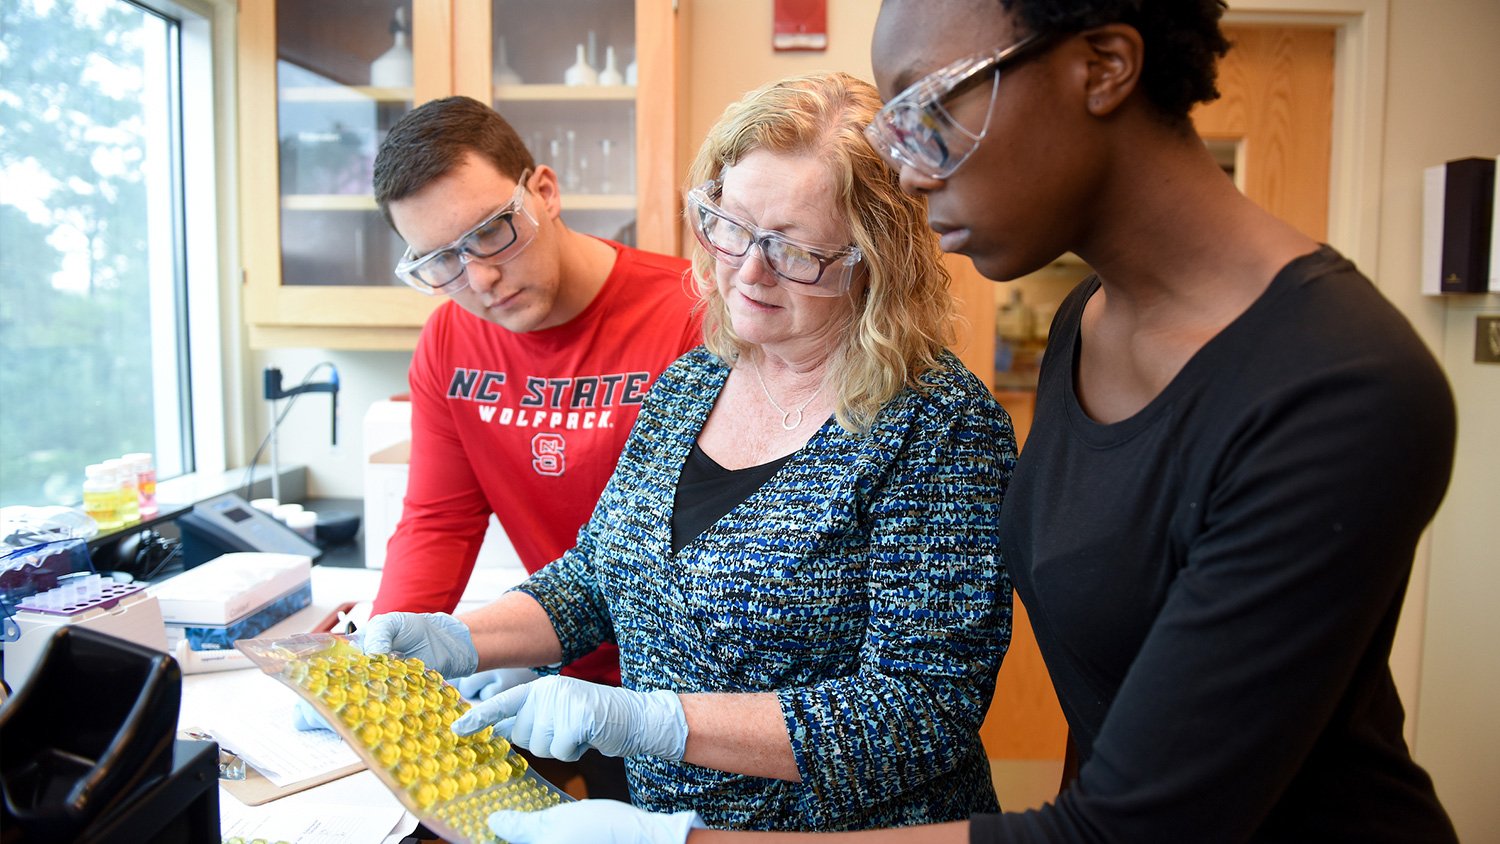 Students and faculty in the lab - Career Connections - College of Natural Resources at NC State University